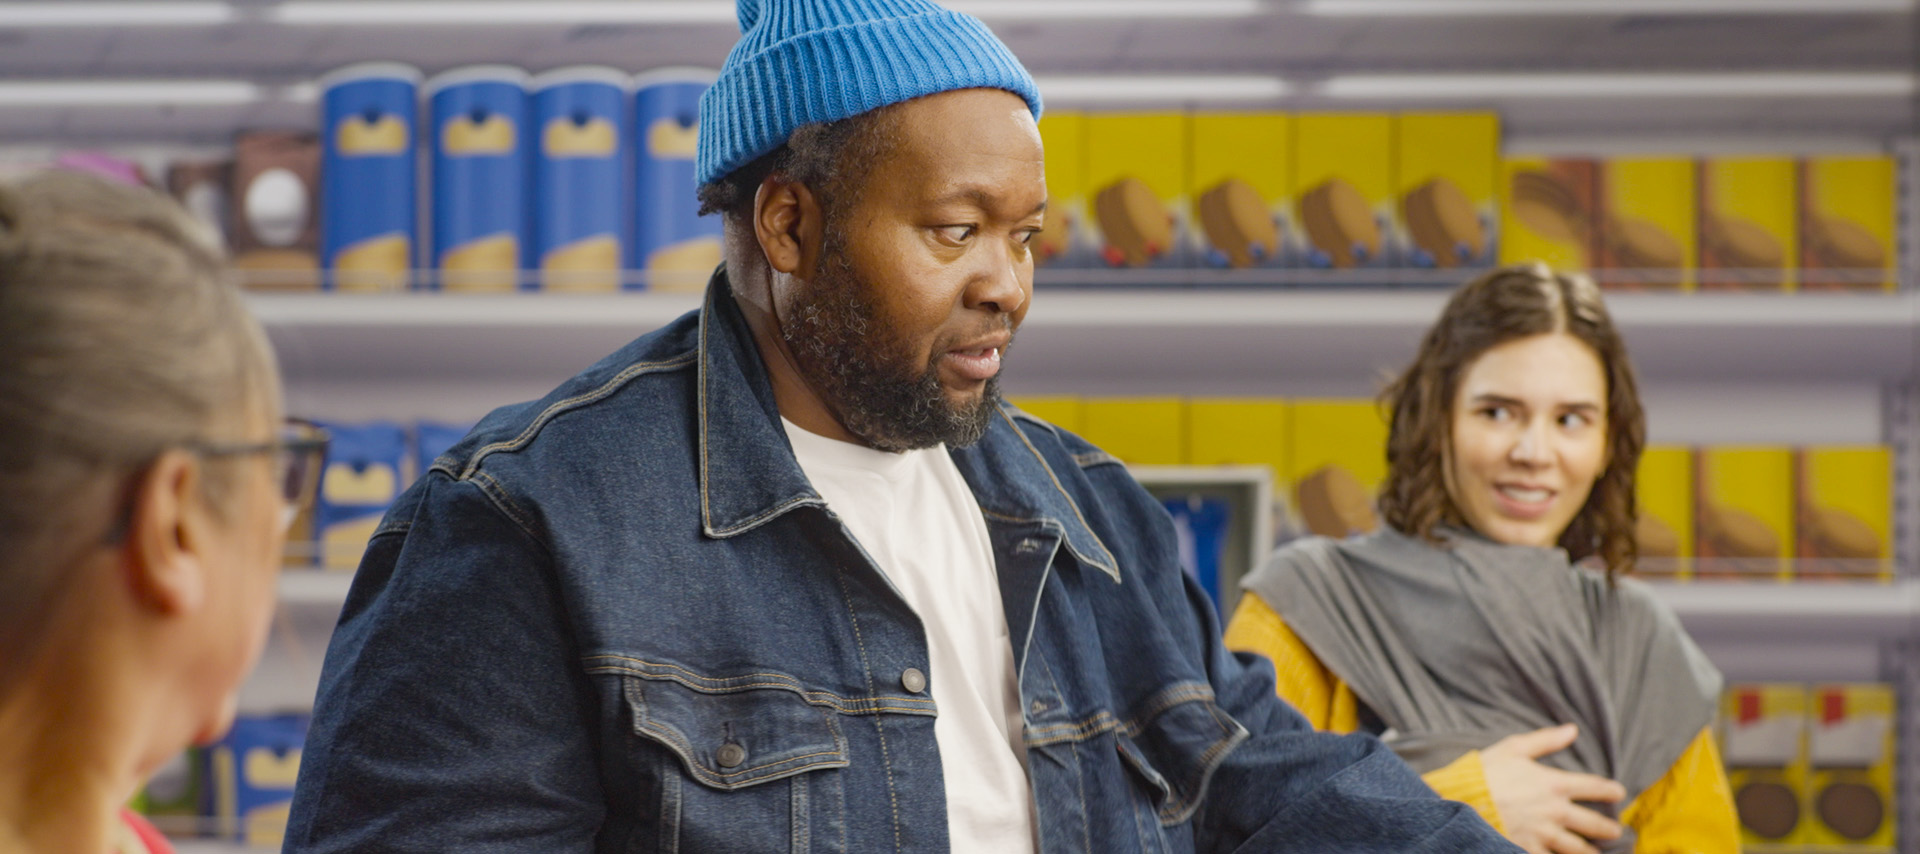 A middle-aged man wearing a denim jacket, white tee shirt and blue tuque looks confused at a self-checkout machine in a grocery store as an older woman and a younger woman holding a baby look up at him from the self-checkout machines they are using.